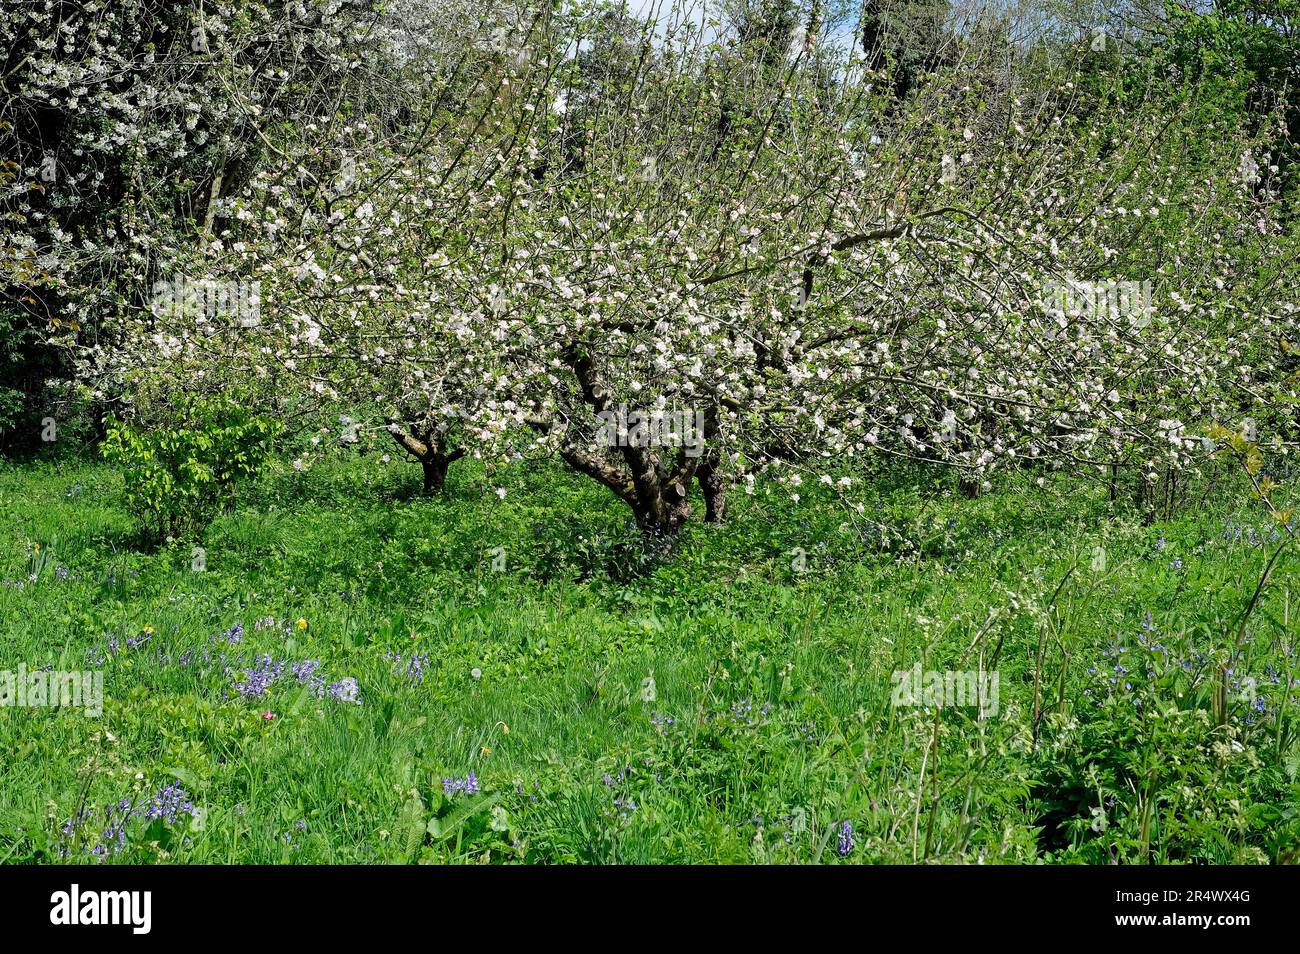 white apple blossom on tree in an english country garden, norfolk, england Stock Photo